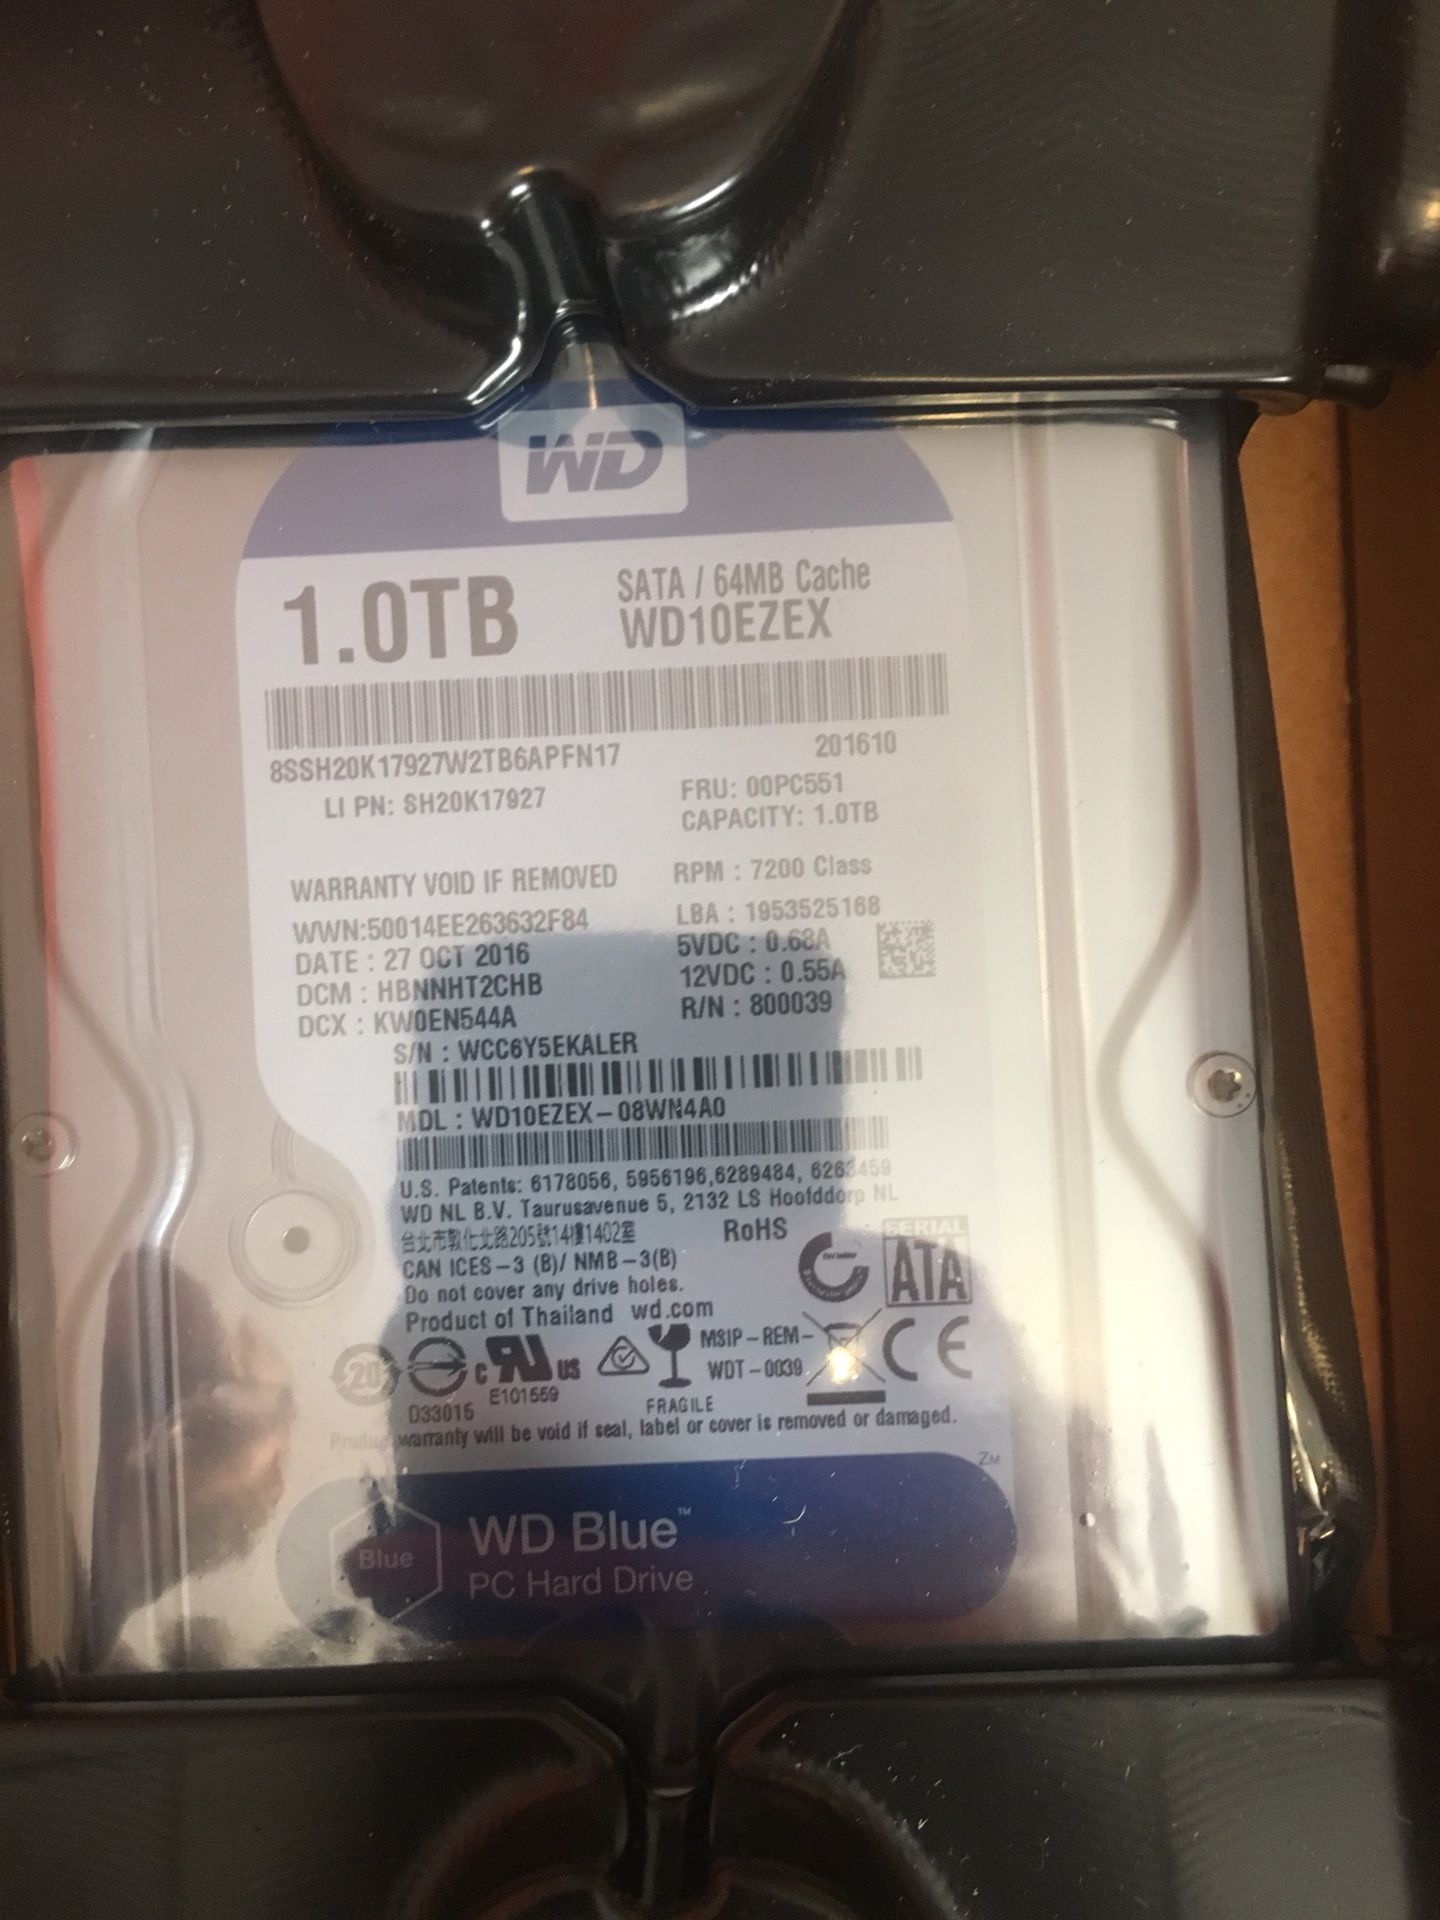 WD Blue 1 TB PC Hard Drive - Brand New, Never Opened